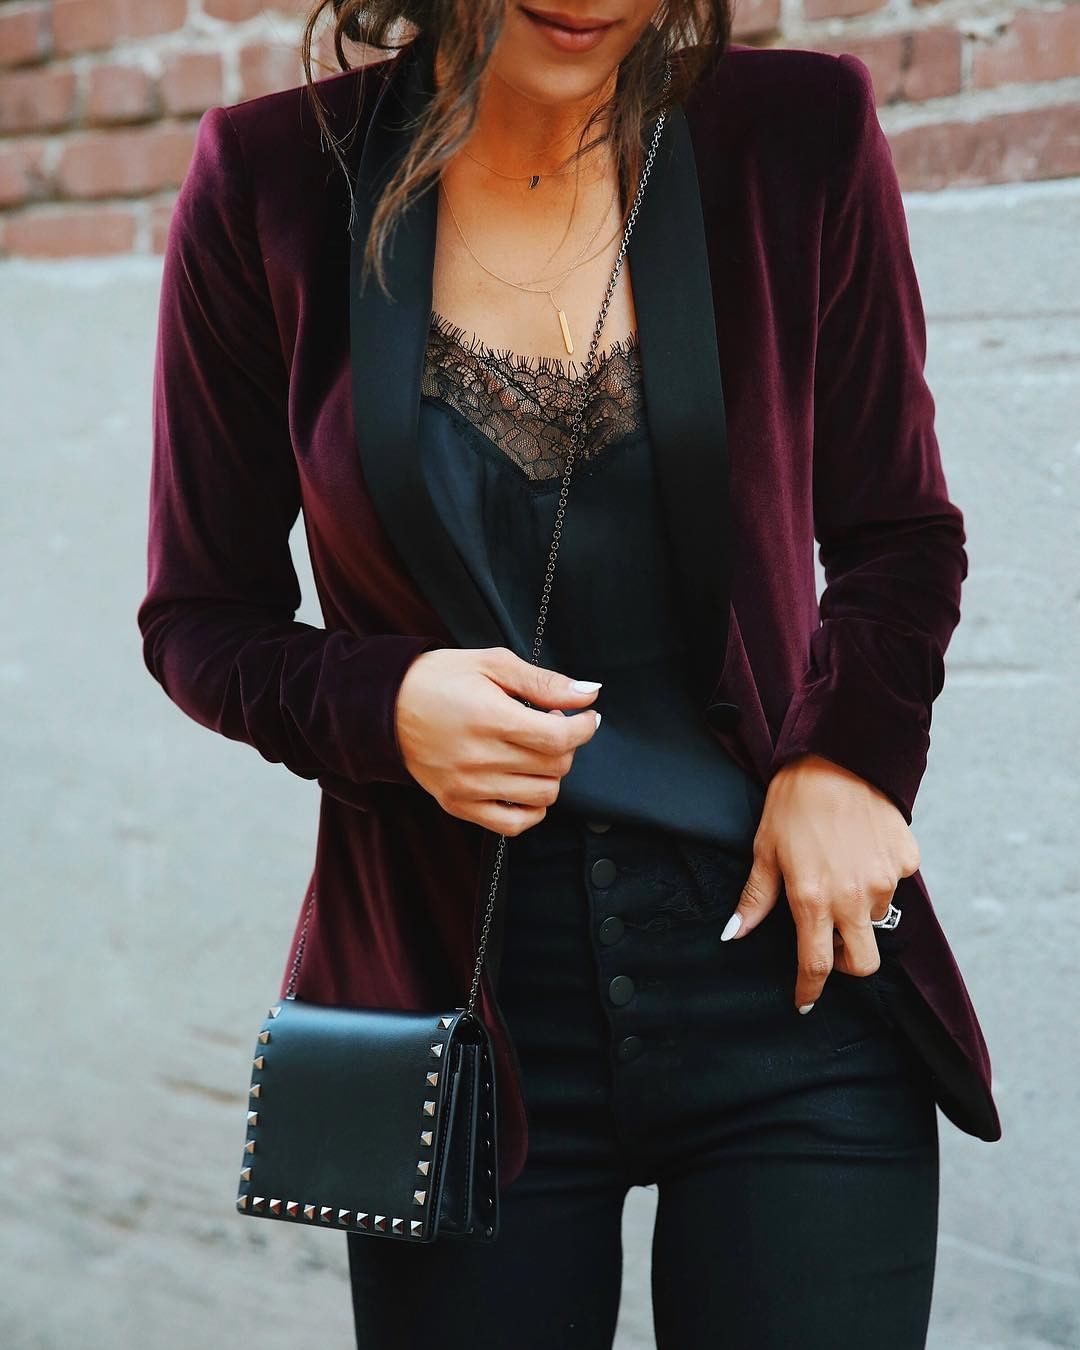 Layer your lacey cami with a luxe velvet blazer for #LTKholidaystyle with a twis…